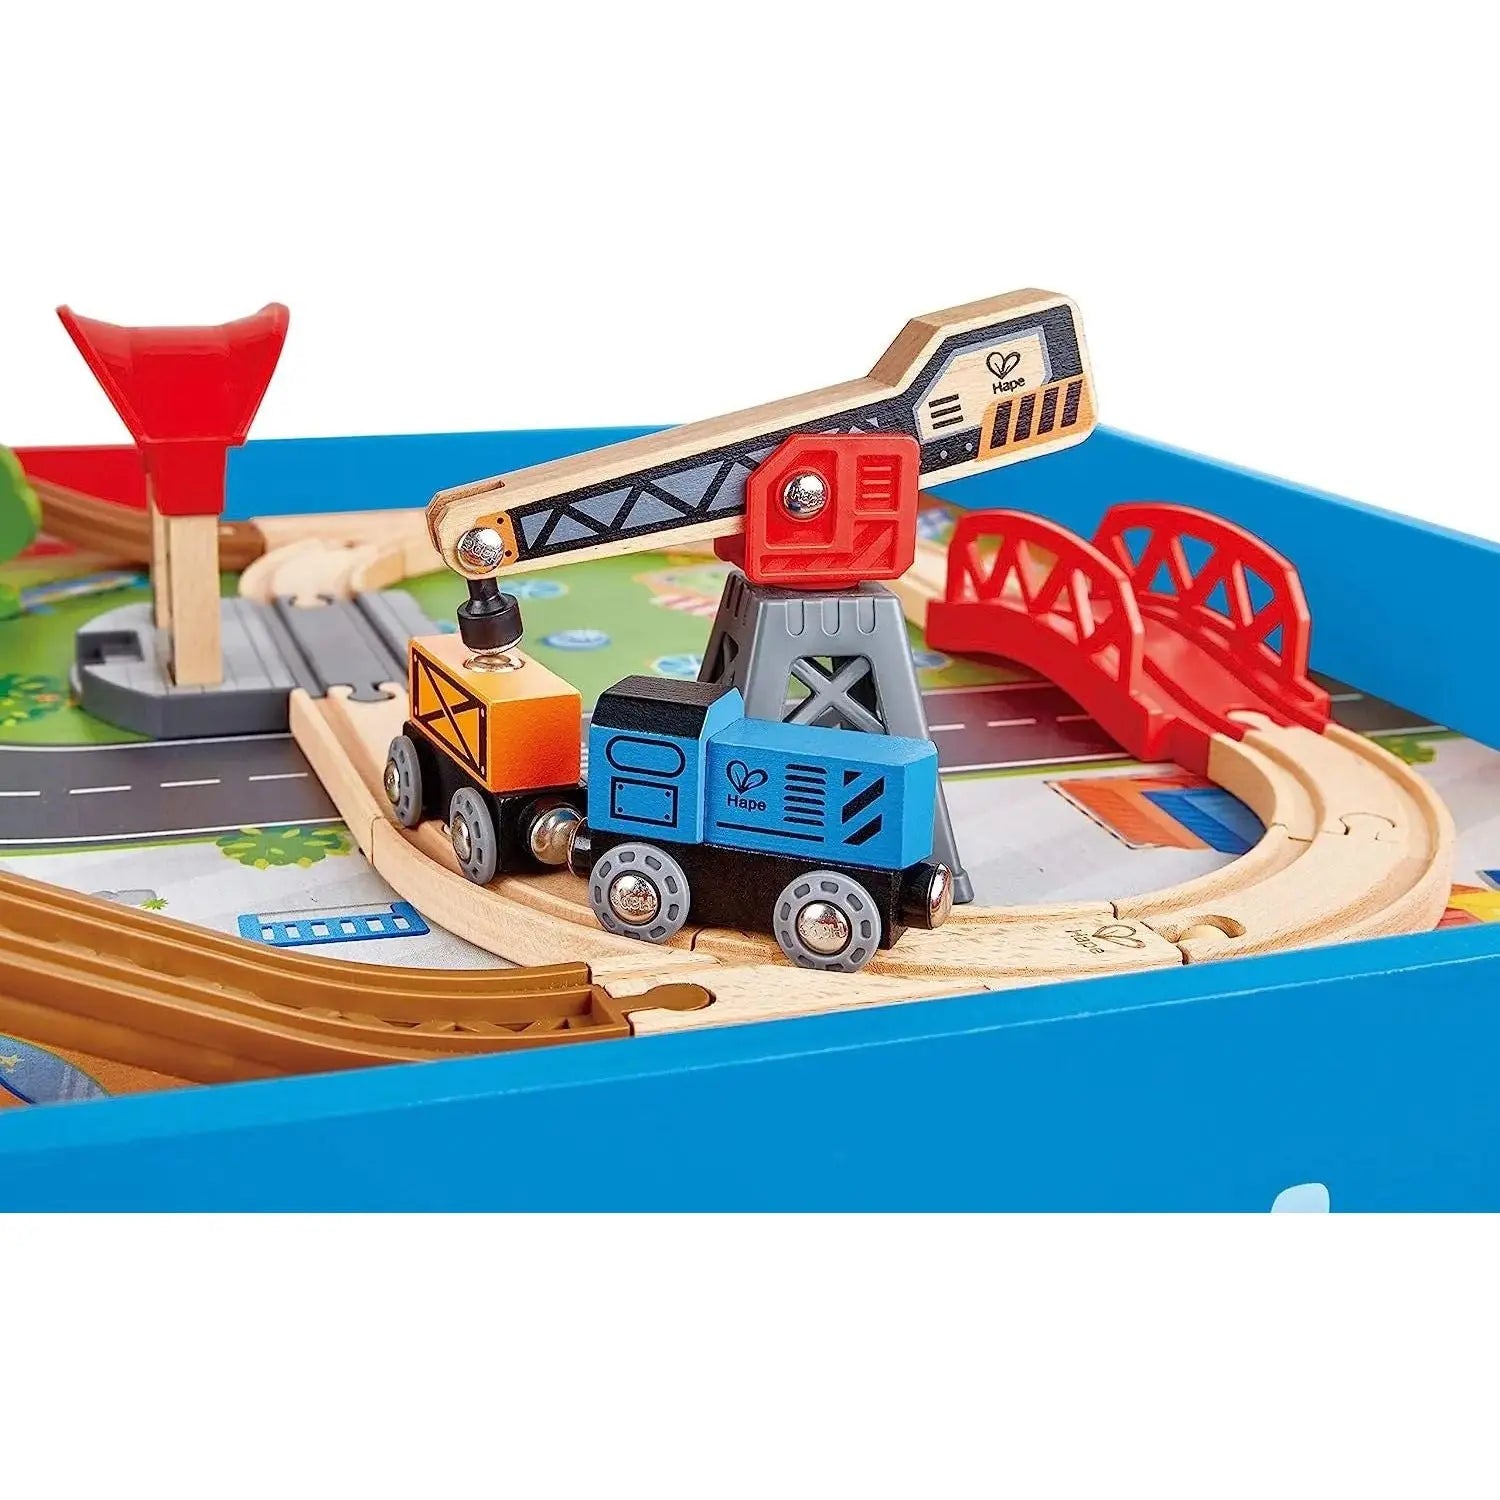 Hape Wooden Blue Foldable Ride-on Engine Table